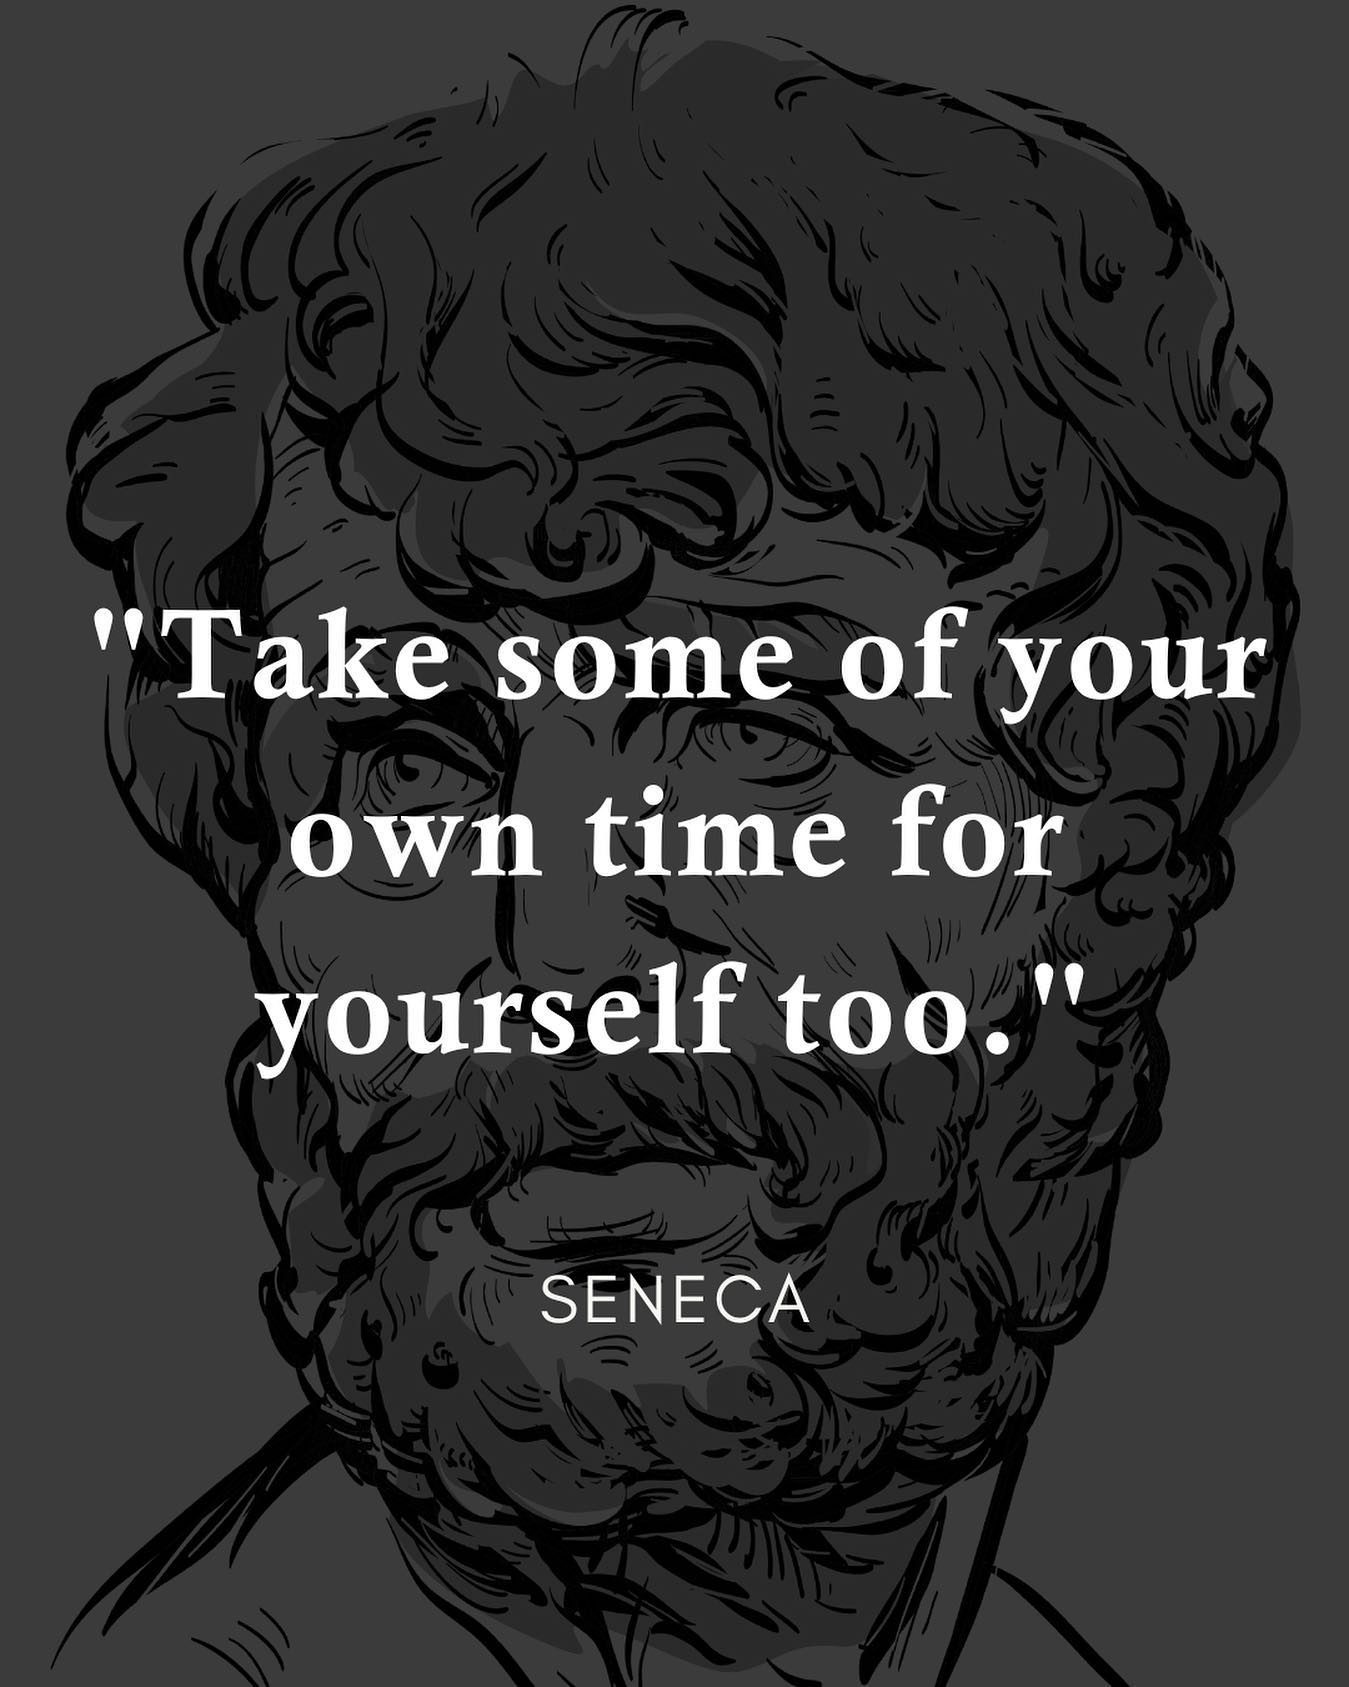 Take some of your own time for yourself too.